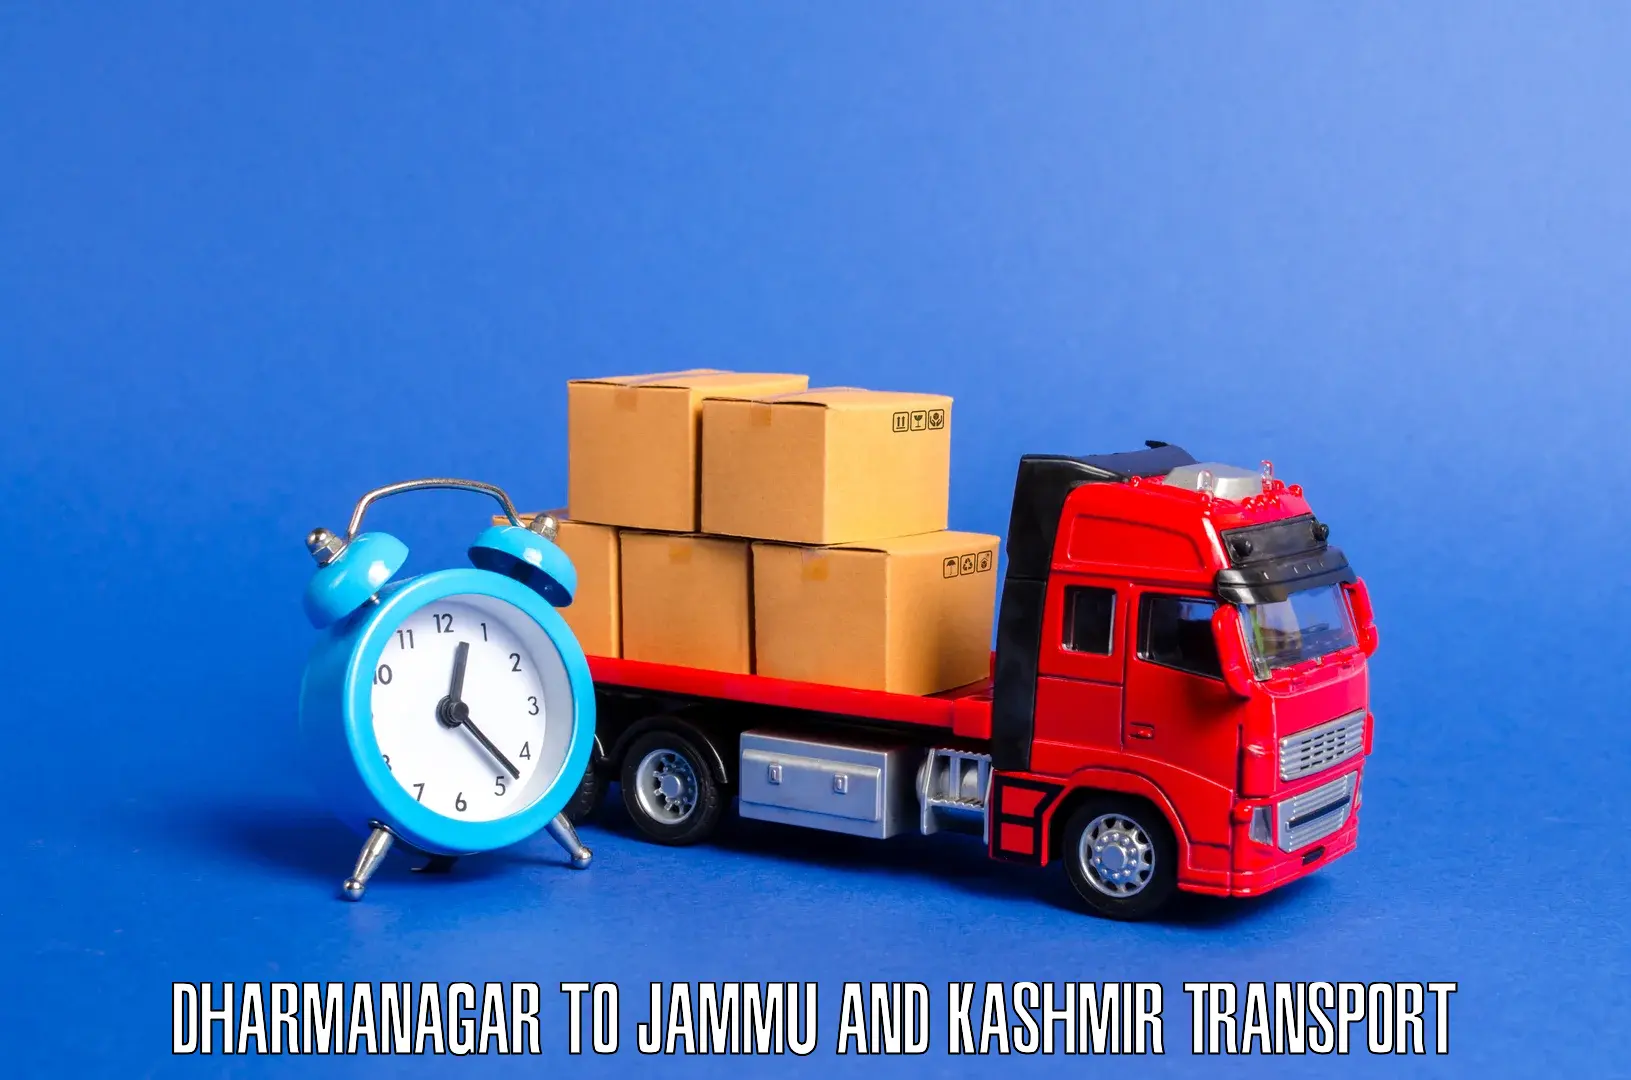 Transport shared services in Dharmanagar to Leh